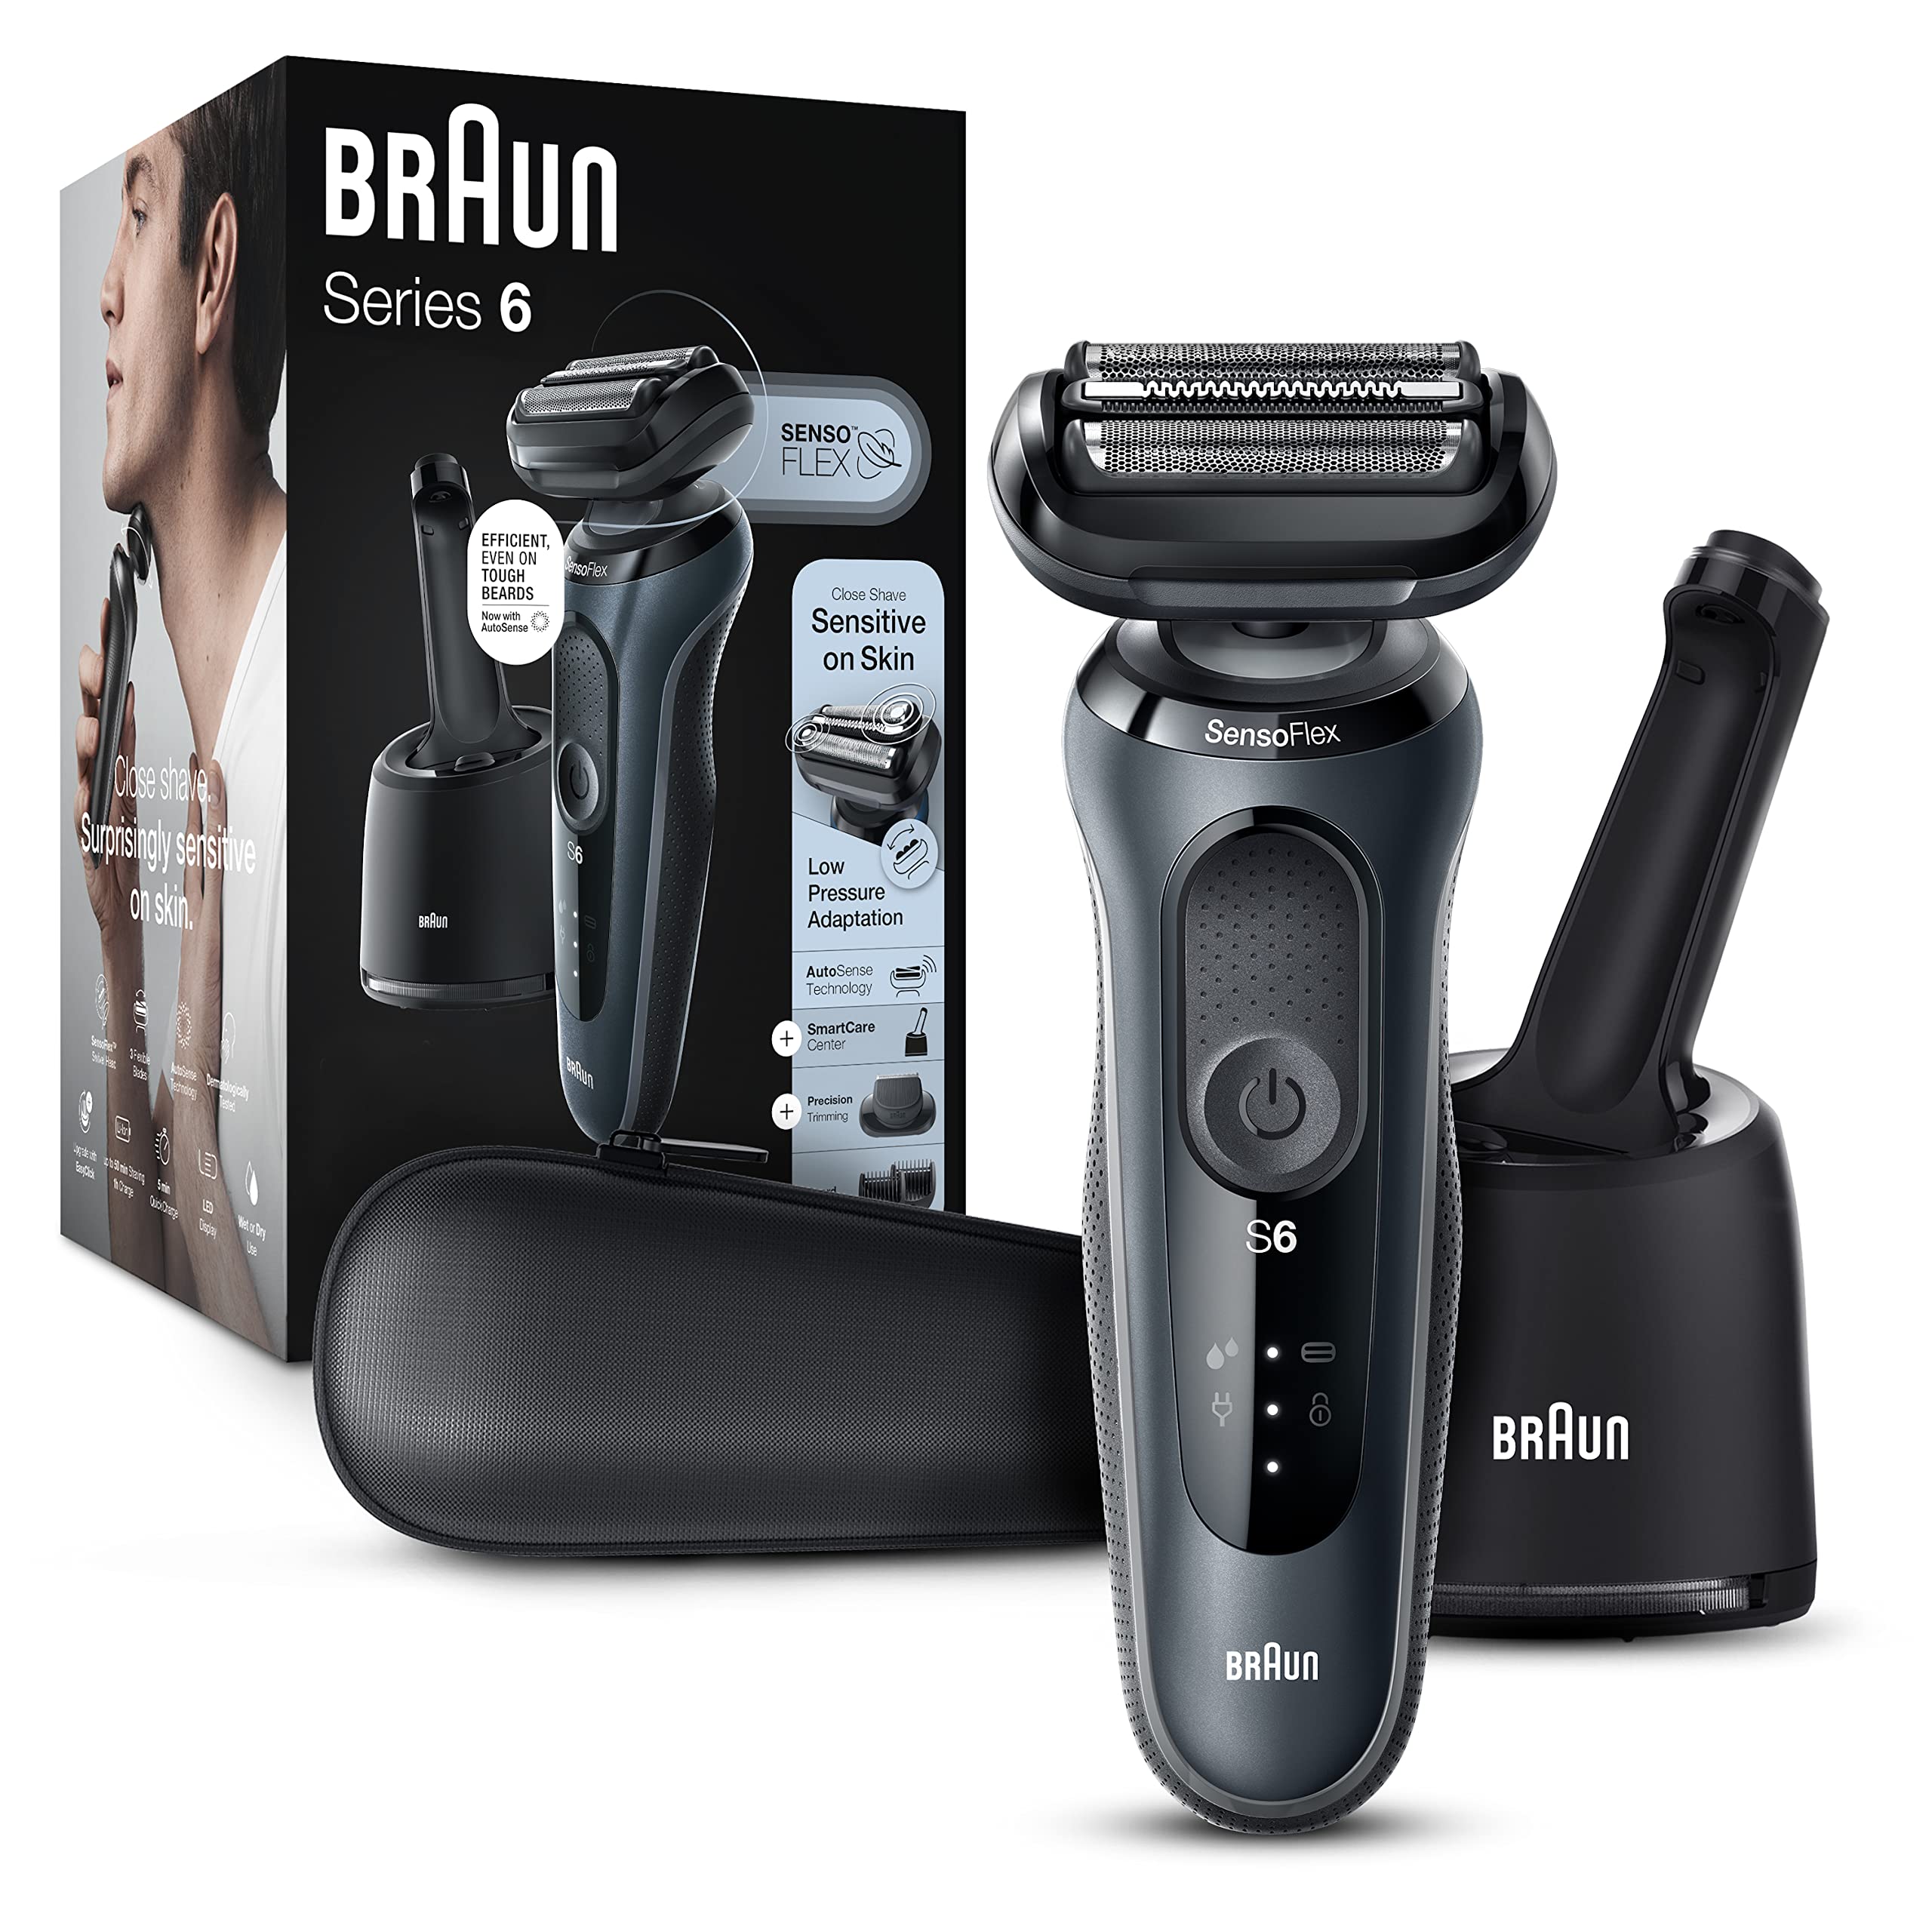 Braun Electric & Wet SmartCare 6 6075cc, Trimmer Shaver, Leather for With Waterproof Charge ,Rechargeable, Clean Case Travel Shave, Foil for & Series Center Razor Black and Dry Grooming, Men, Beard